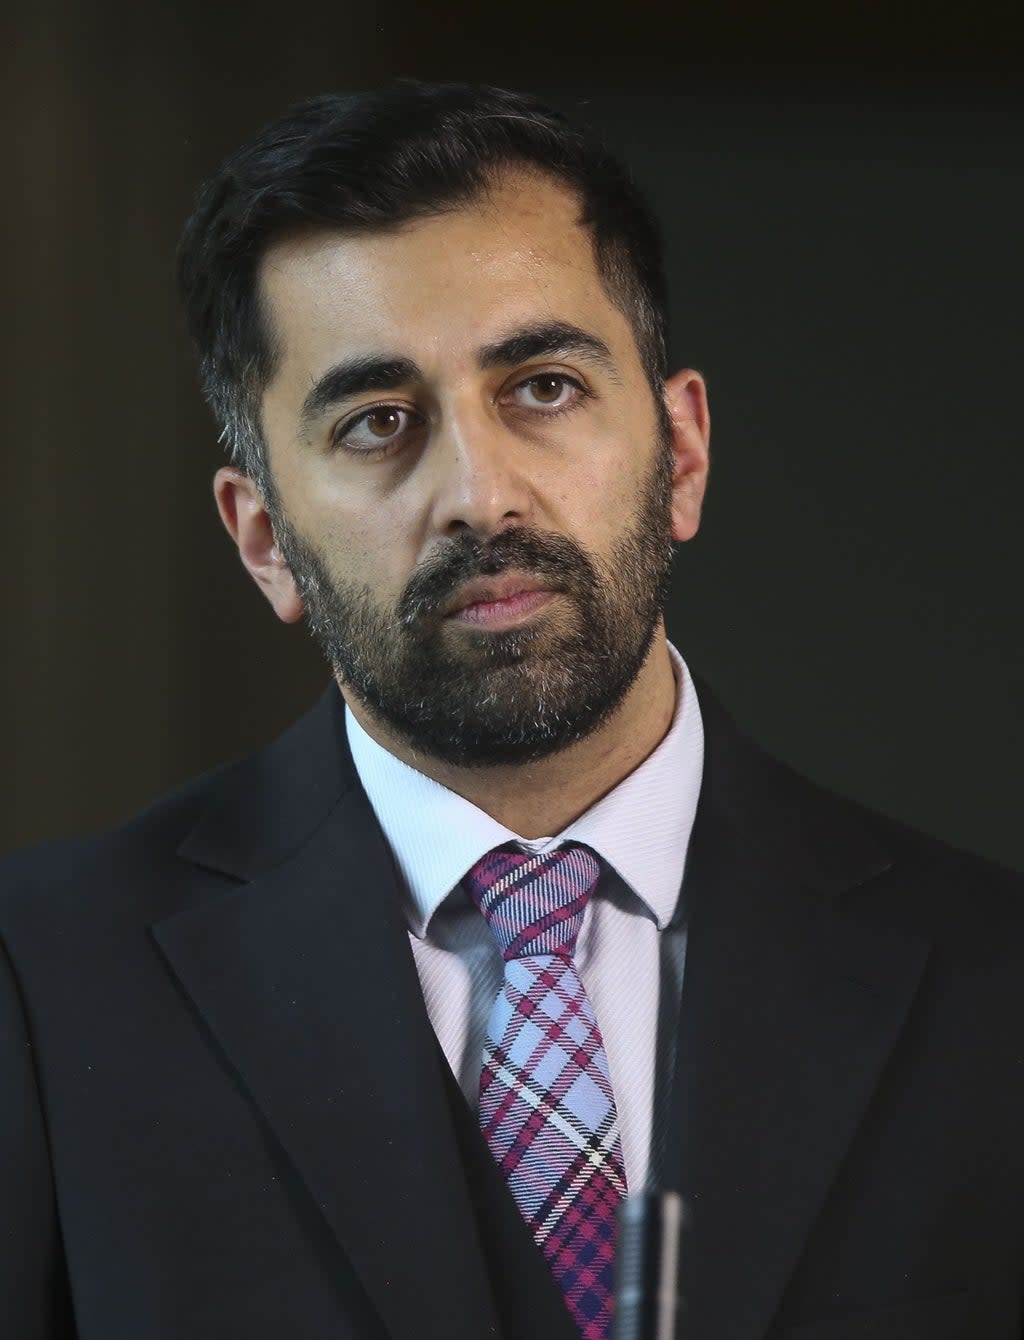 Humza Yousaf and his wife complained after their daughter was refused a nursery place (PA) (PA Wire)